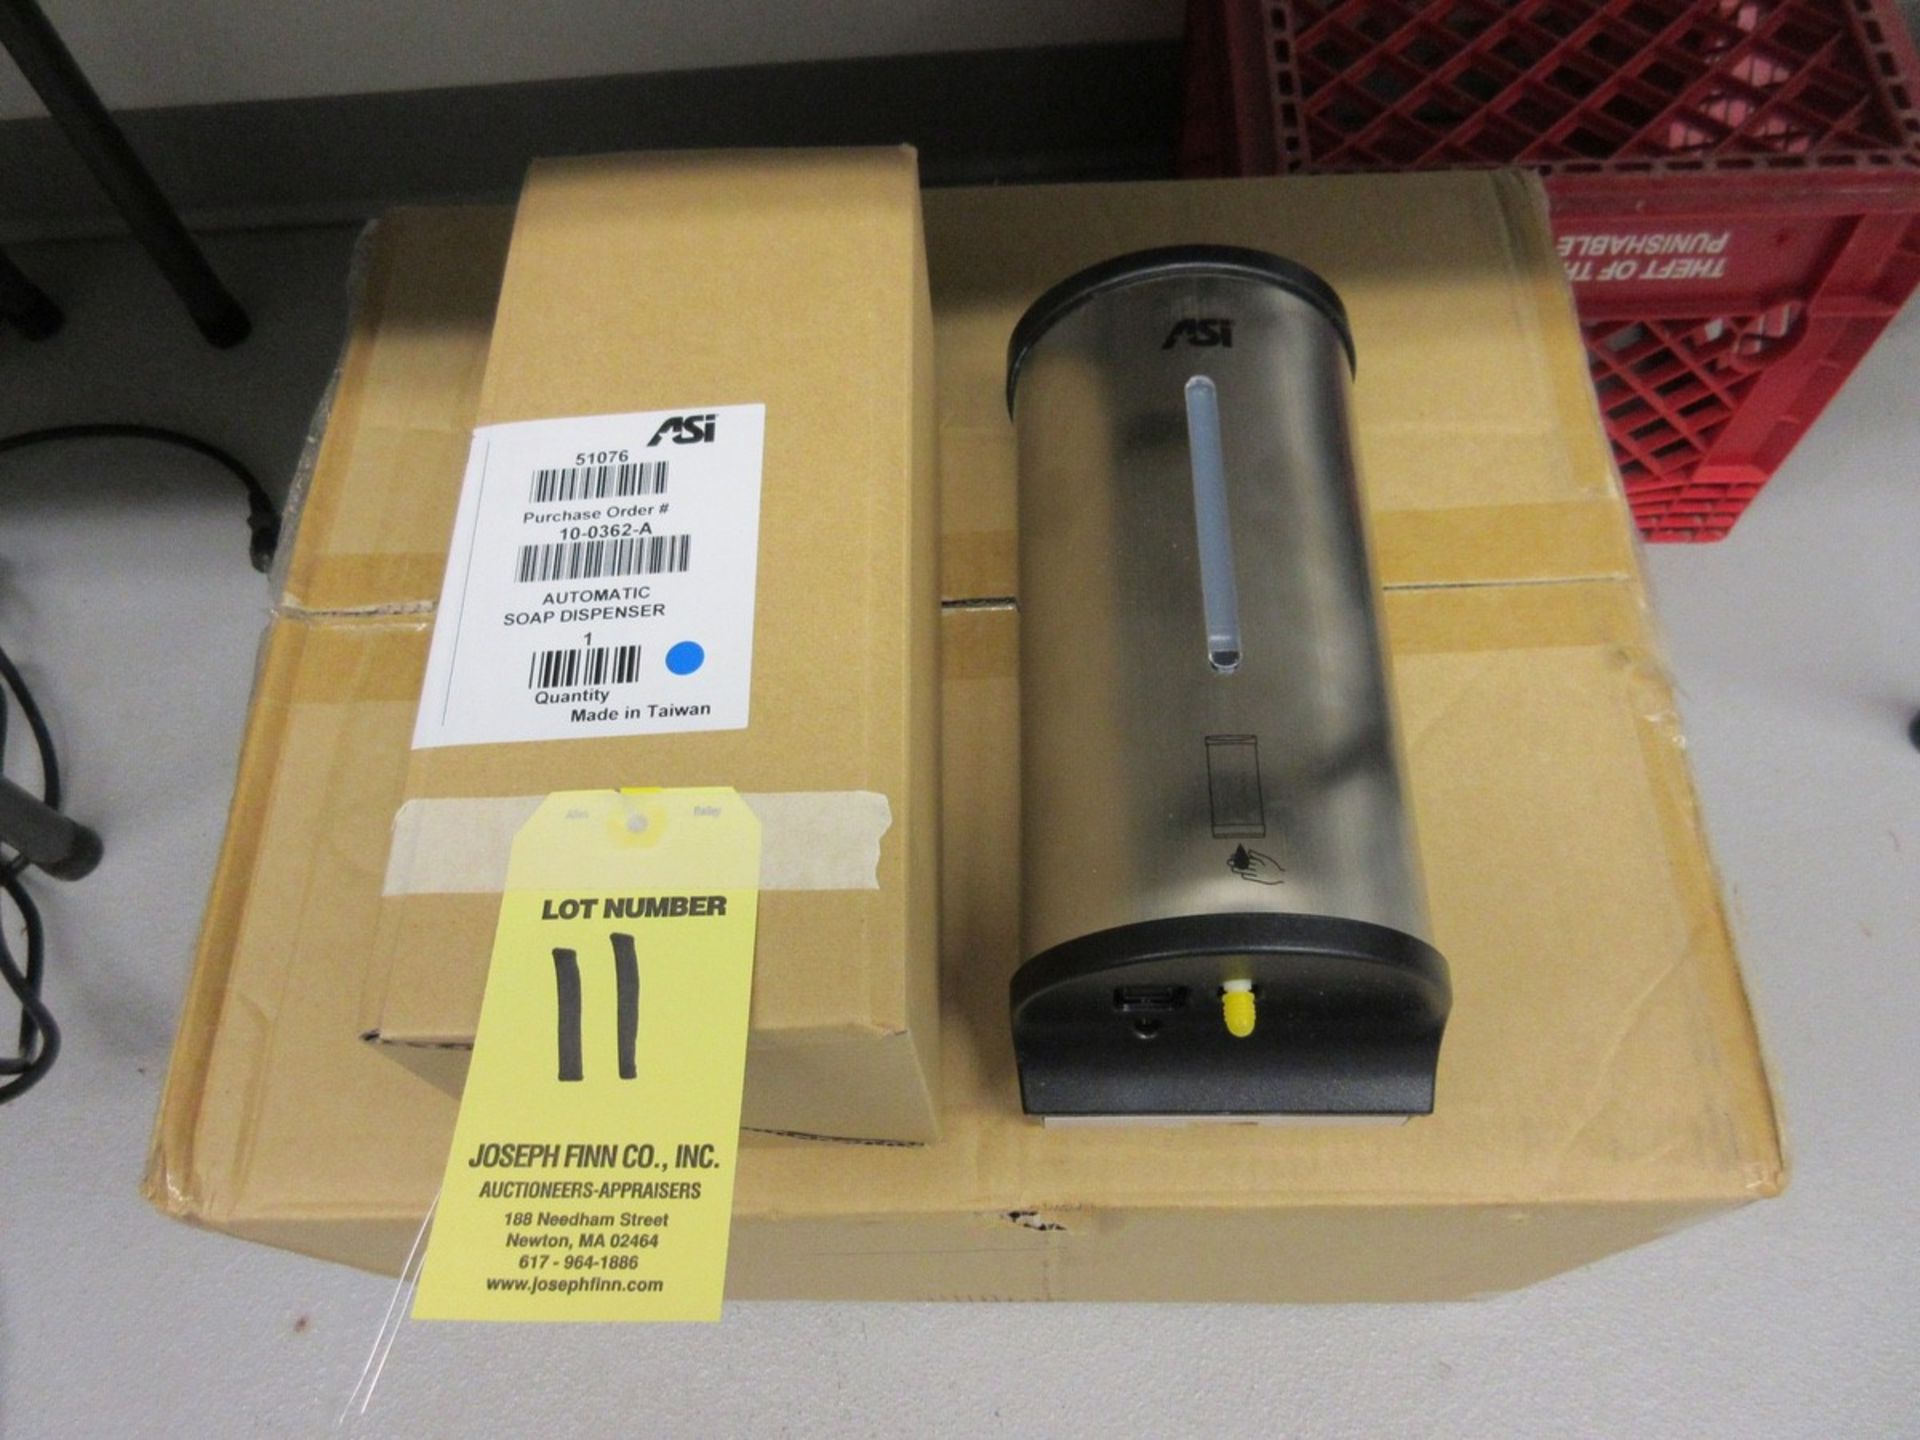 (1) Case of ASI 51076 Automatic Soap Dispensers, 12 Pcs. (New in Box)